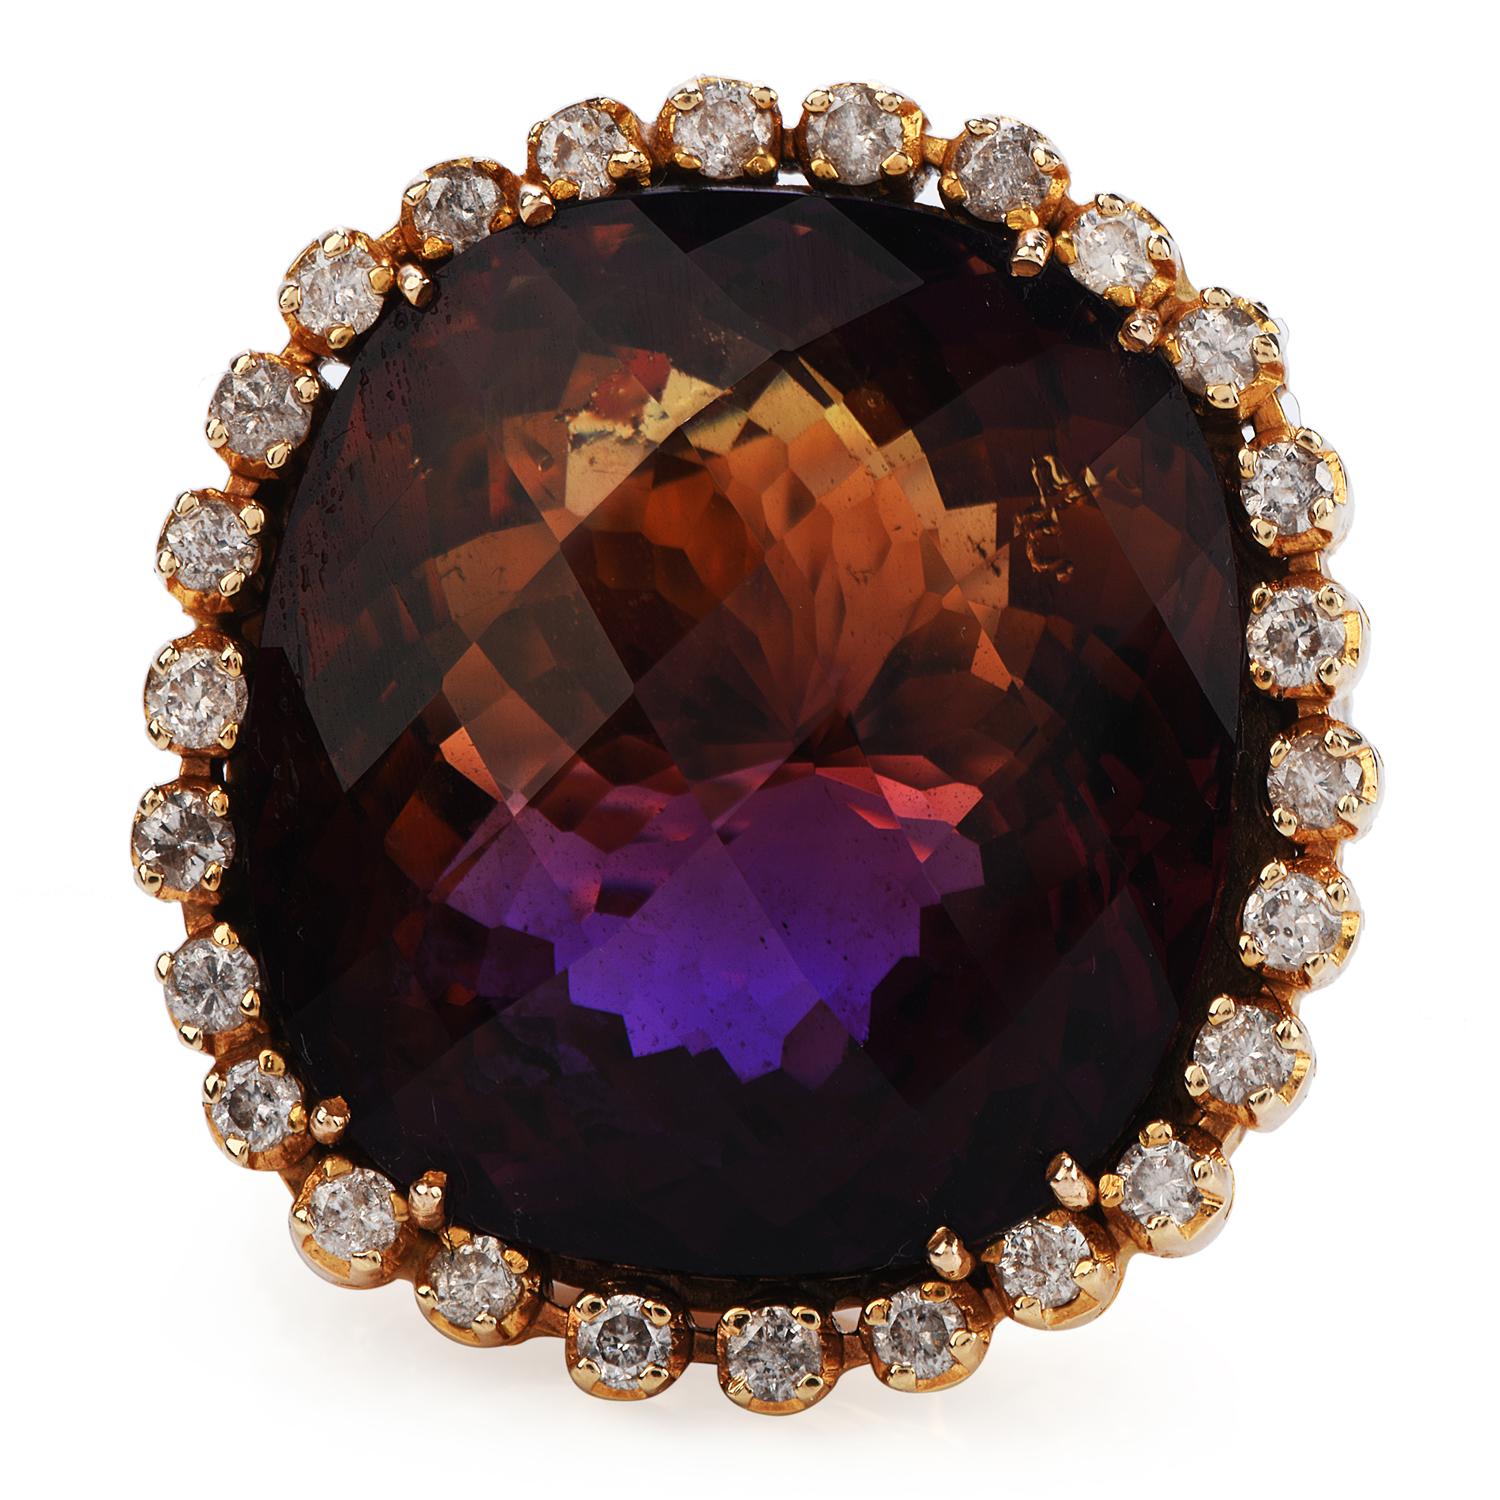 Hand Crafted in solid 18K Yellow Gold, this extravagant ring consists of a cushion-cut 51.59 carat Ametrine ( combination of amethyst and citrine), surrounded by 42 round-cut diamonds, H-I color, SI clarity (no black inclusions) for a cumulative